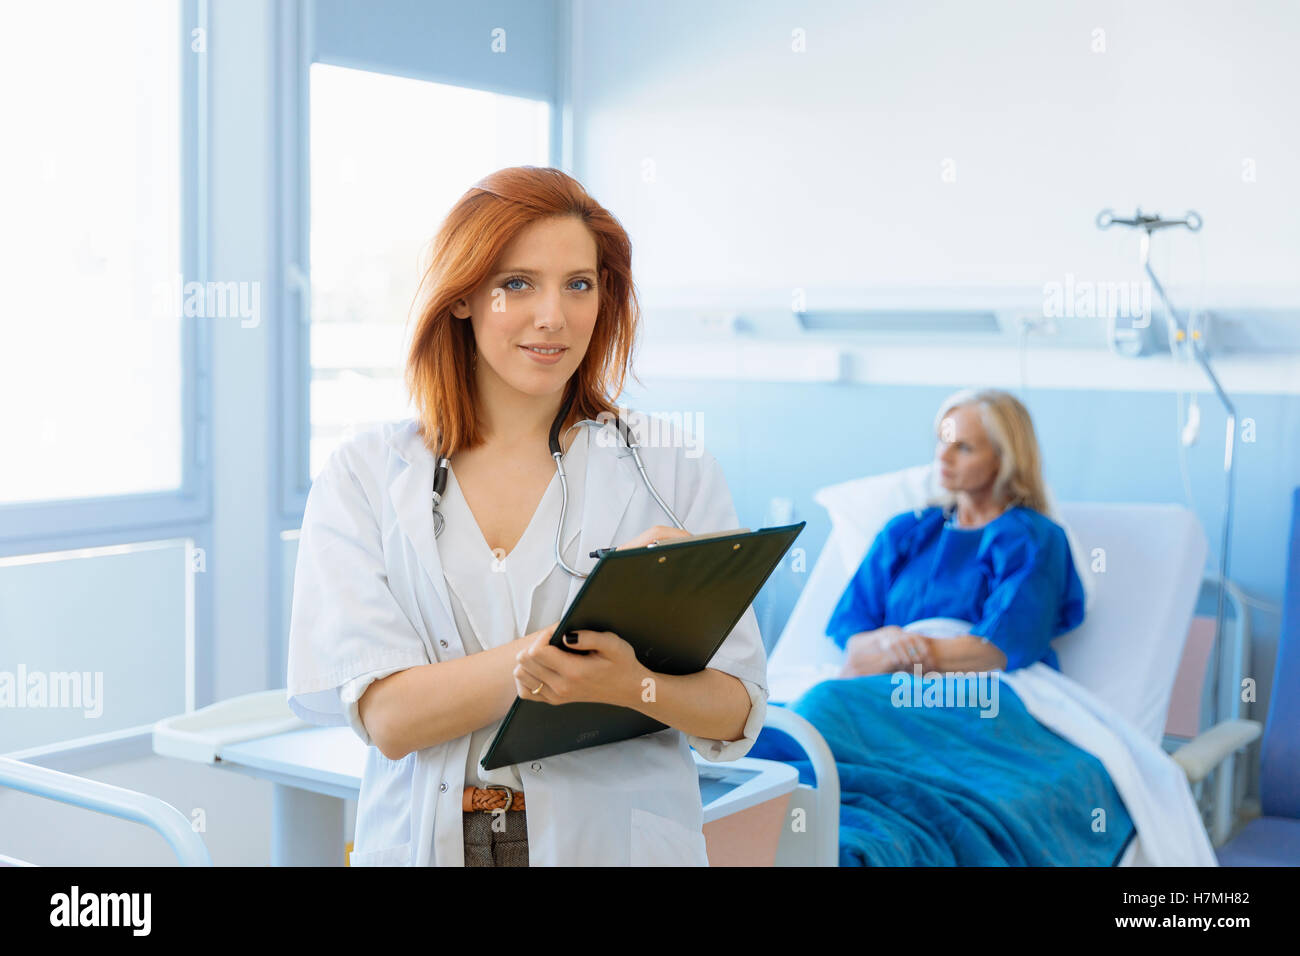 Portrait of a female doctor in hospital Stock Photo